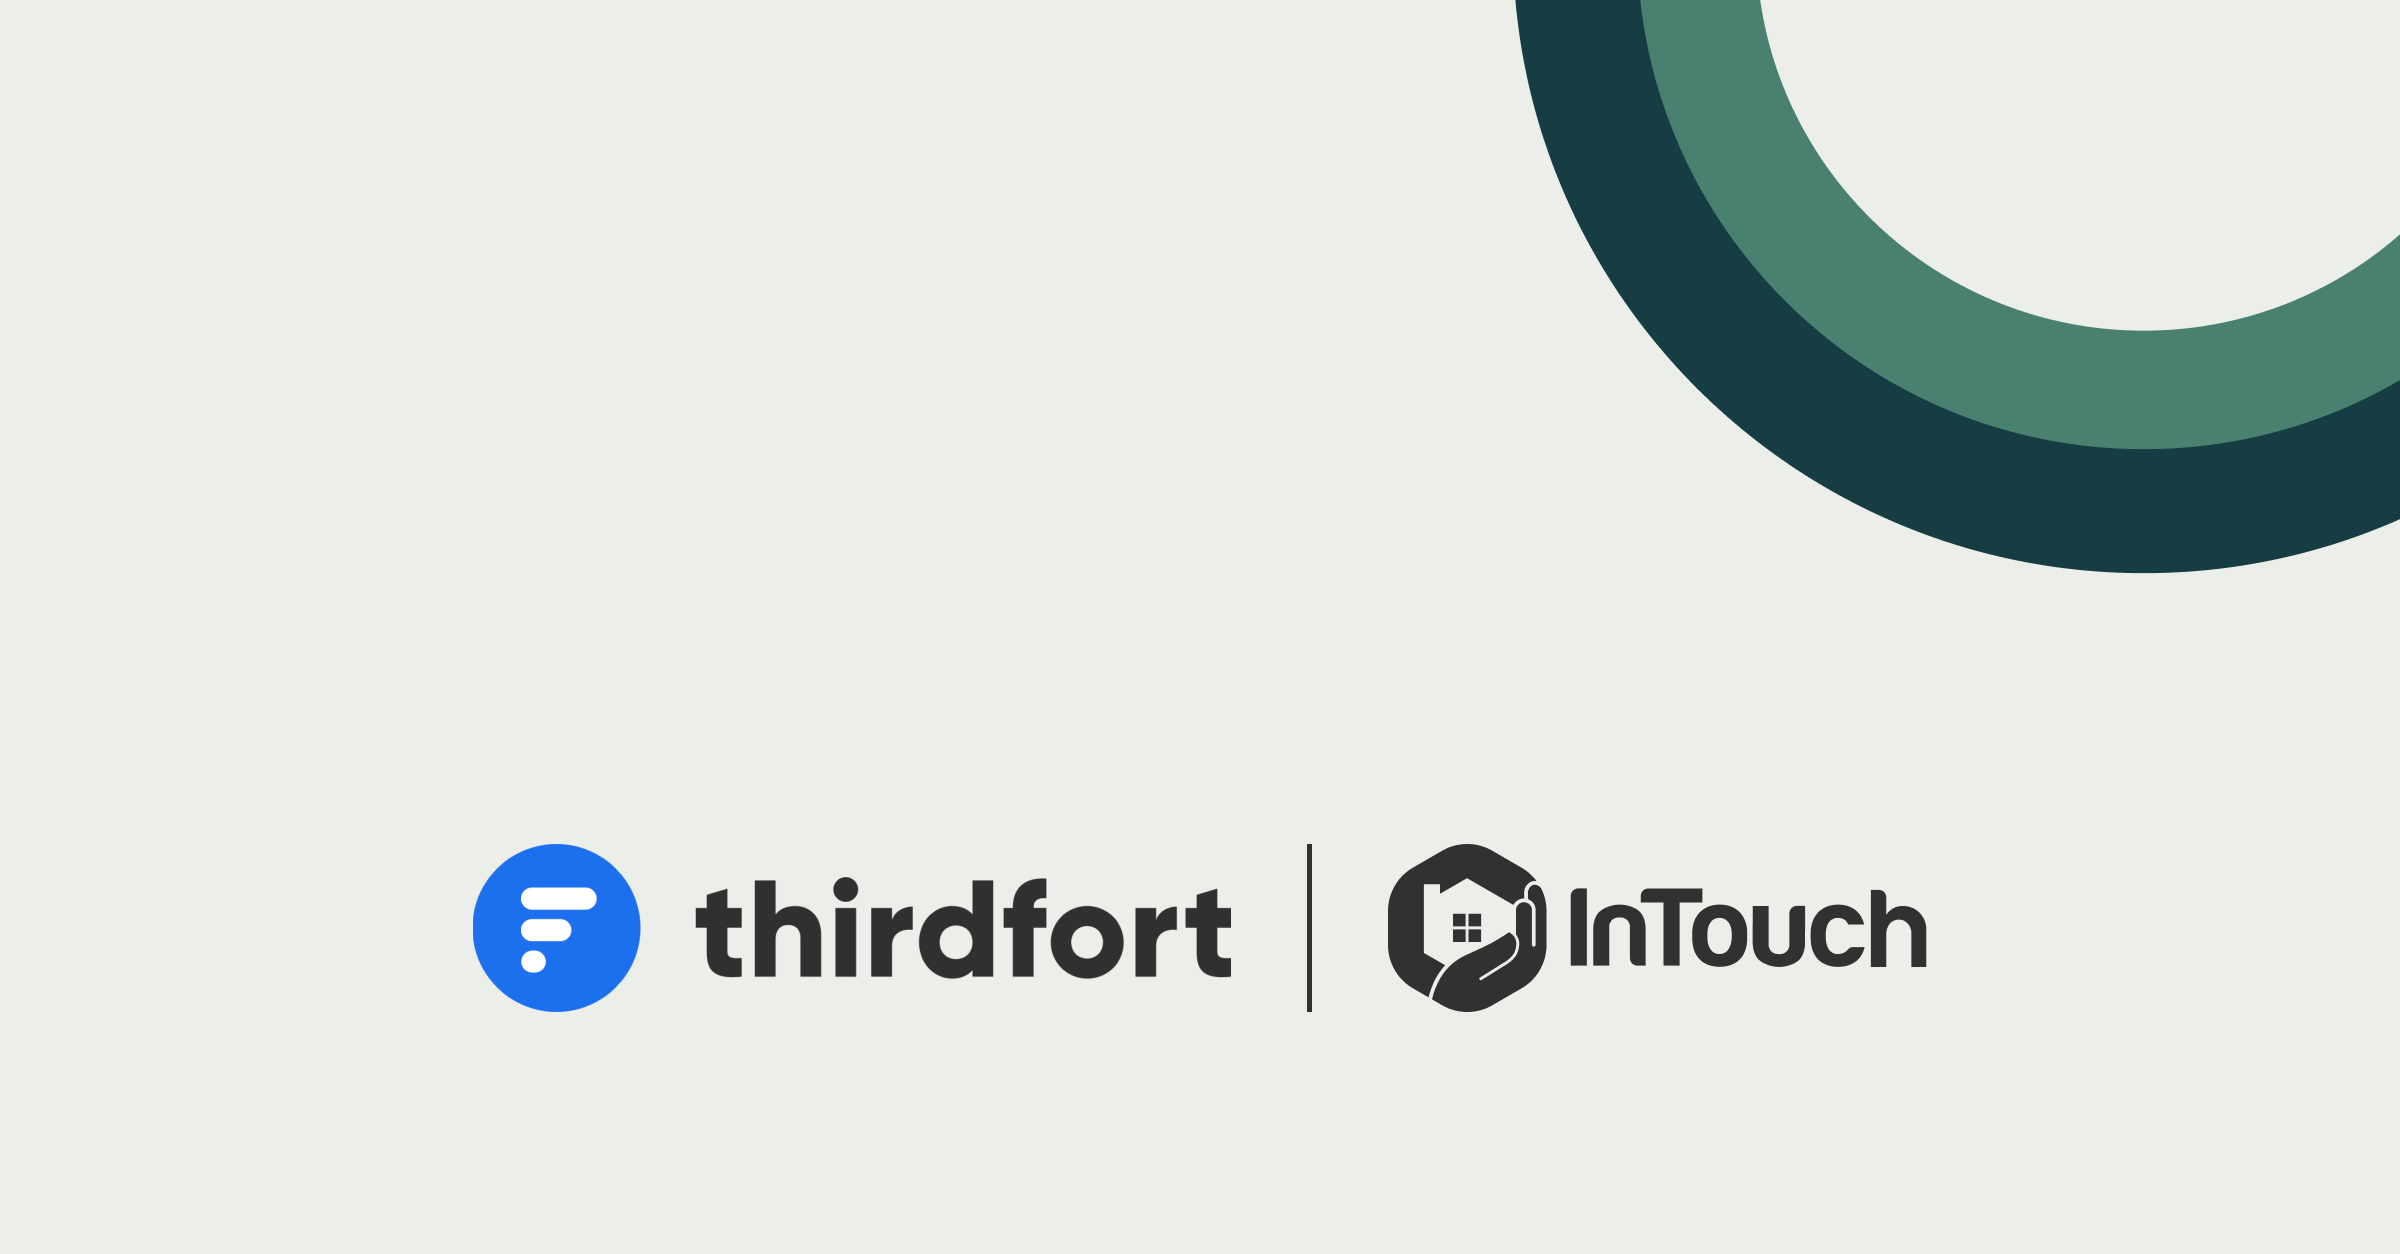 Thirdfort and Intouch logos on a grey background